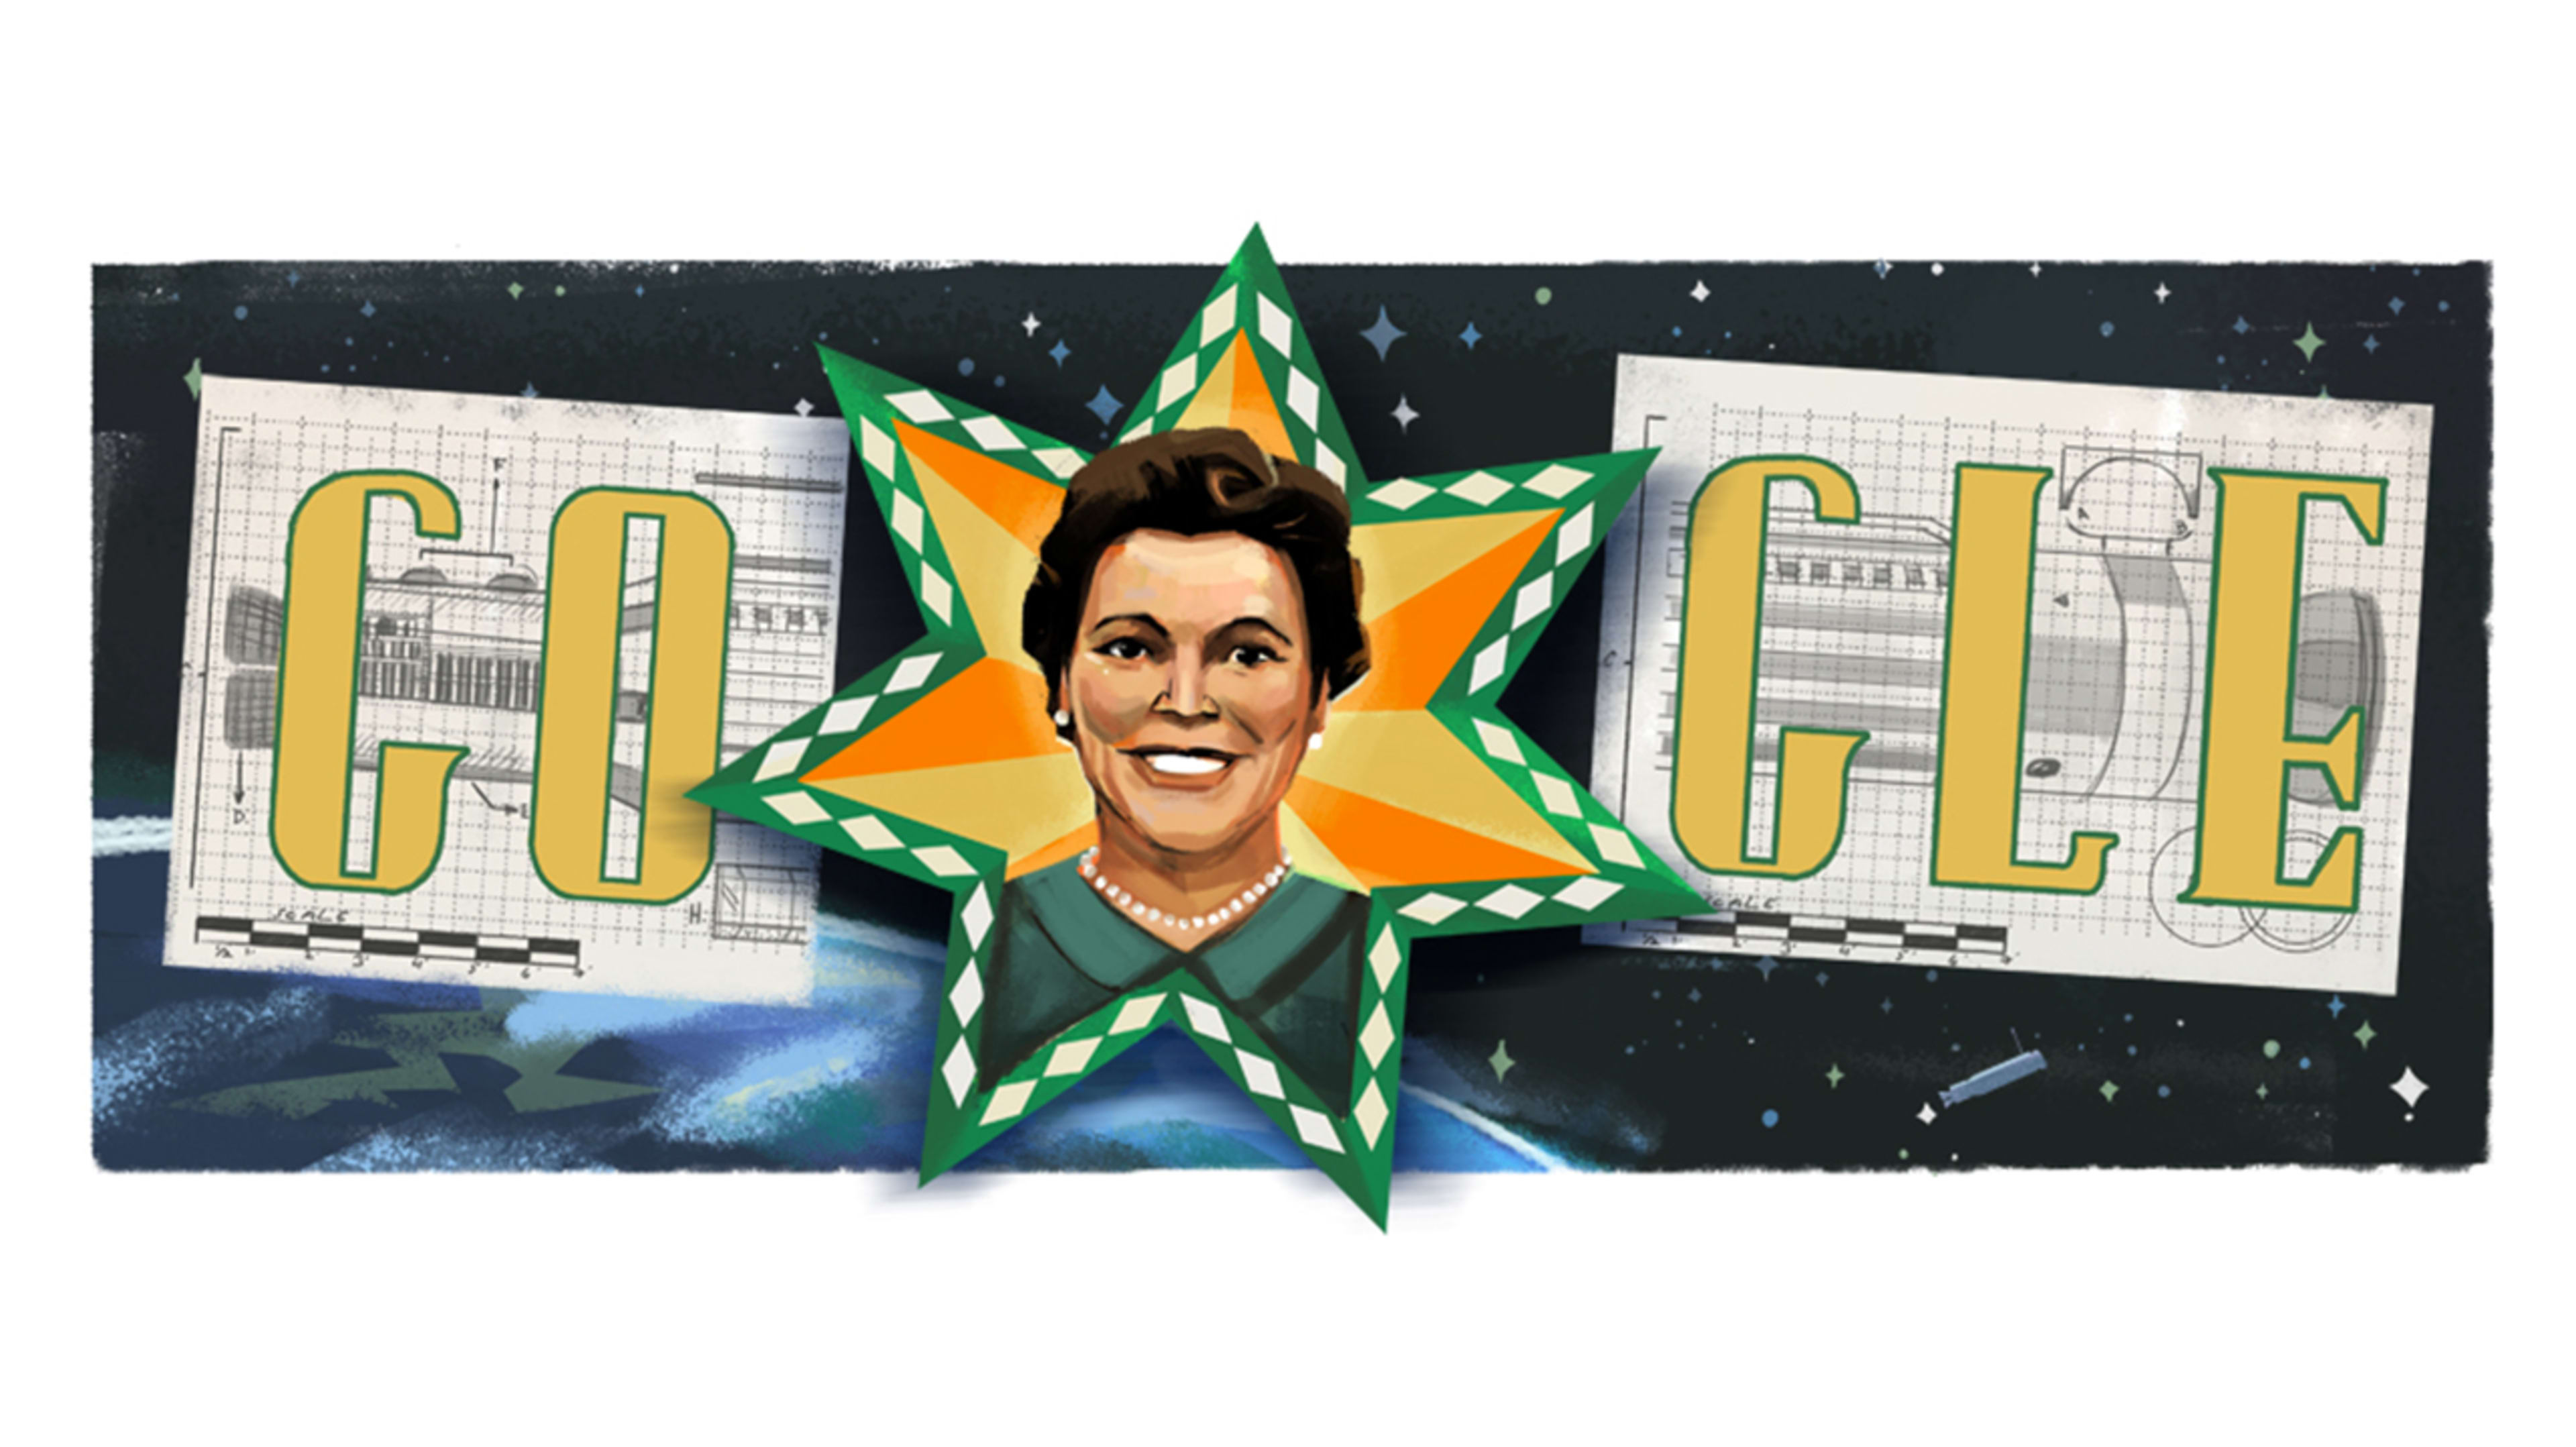 Today’s Google doodle celebrates the first Native-American woman engineer